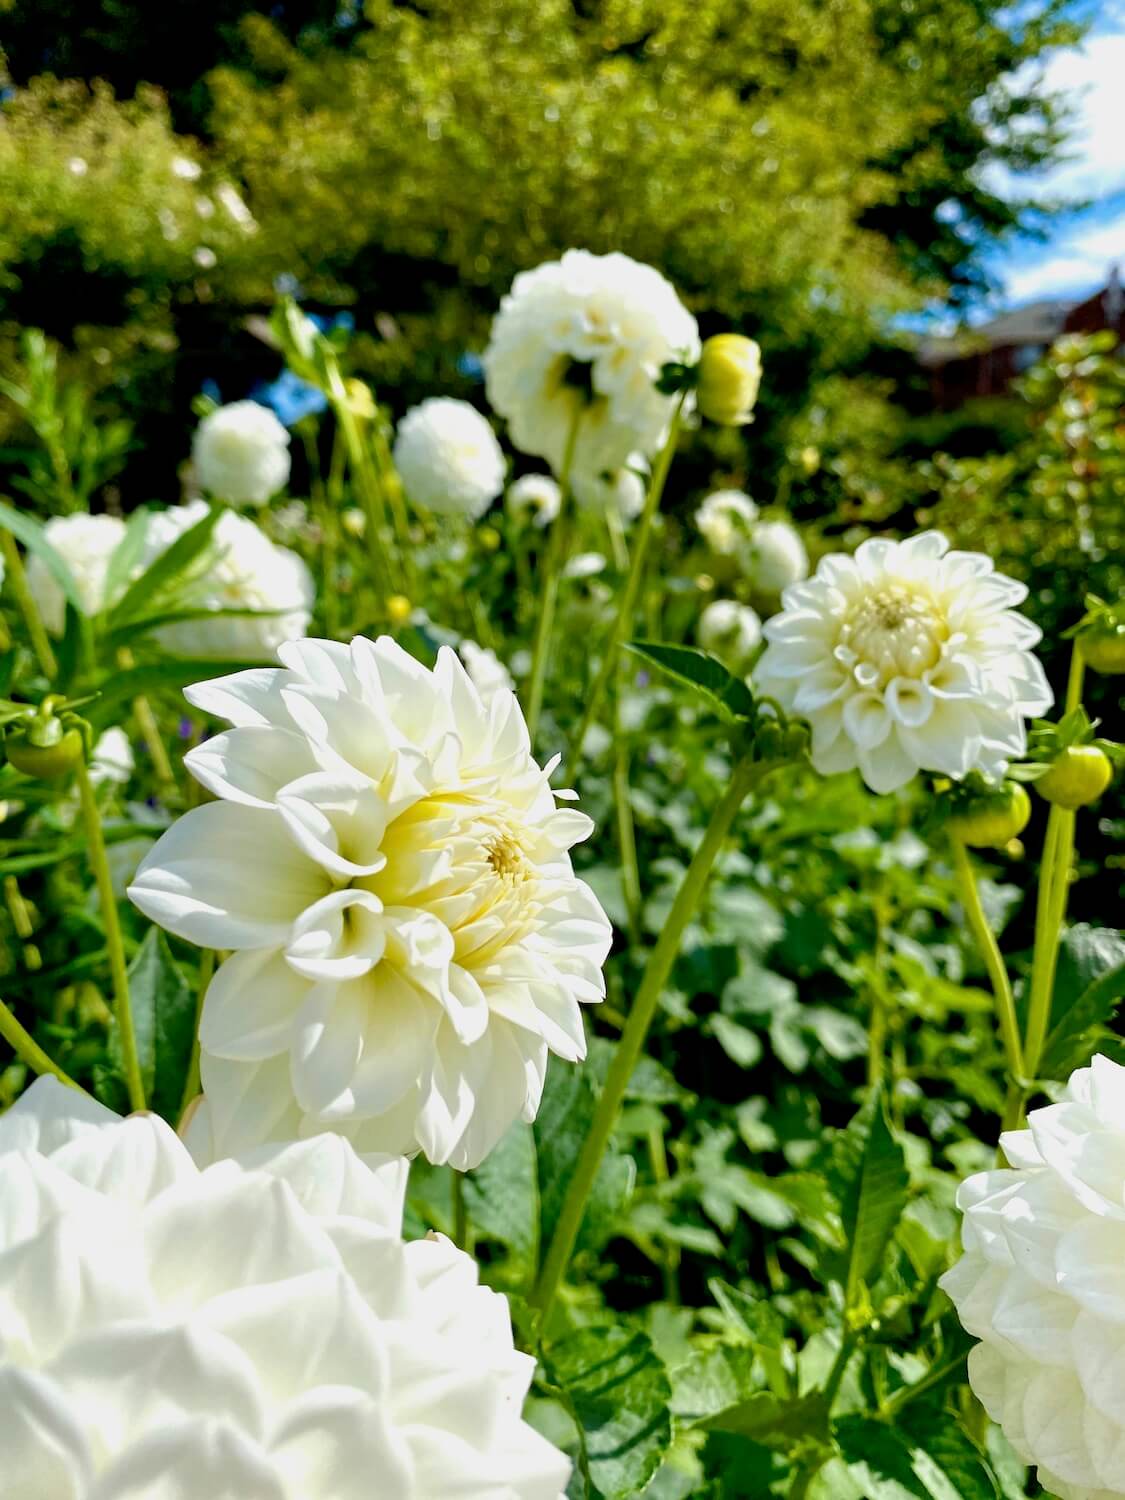 Fresh whiteness of Dahlia blooms in a park with trees and blue sky in the out of focus background. Several new blooms are tightly held together while an older flower is more relaxed in the foreground.